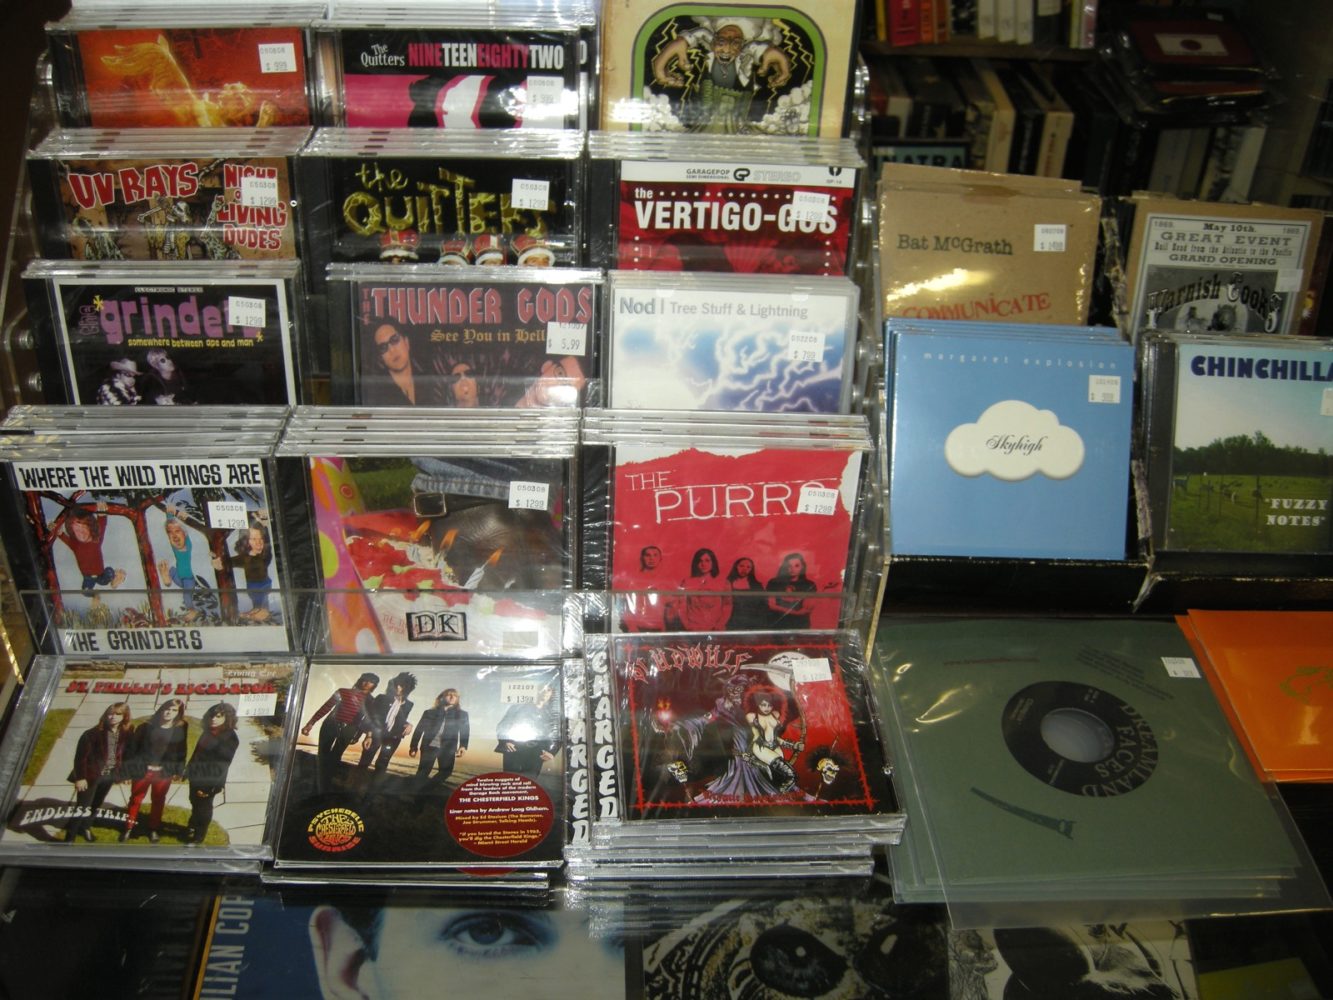 Local records section at Bop Shop Records in Rochester, New York